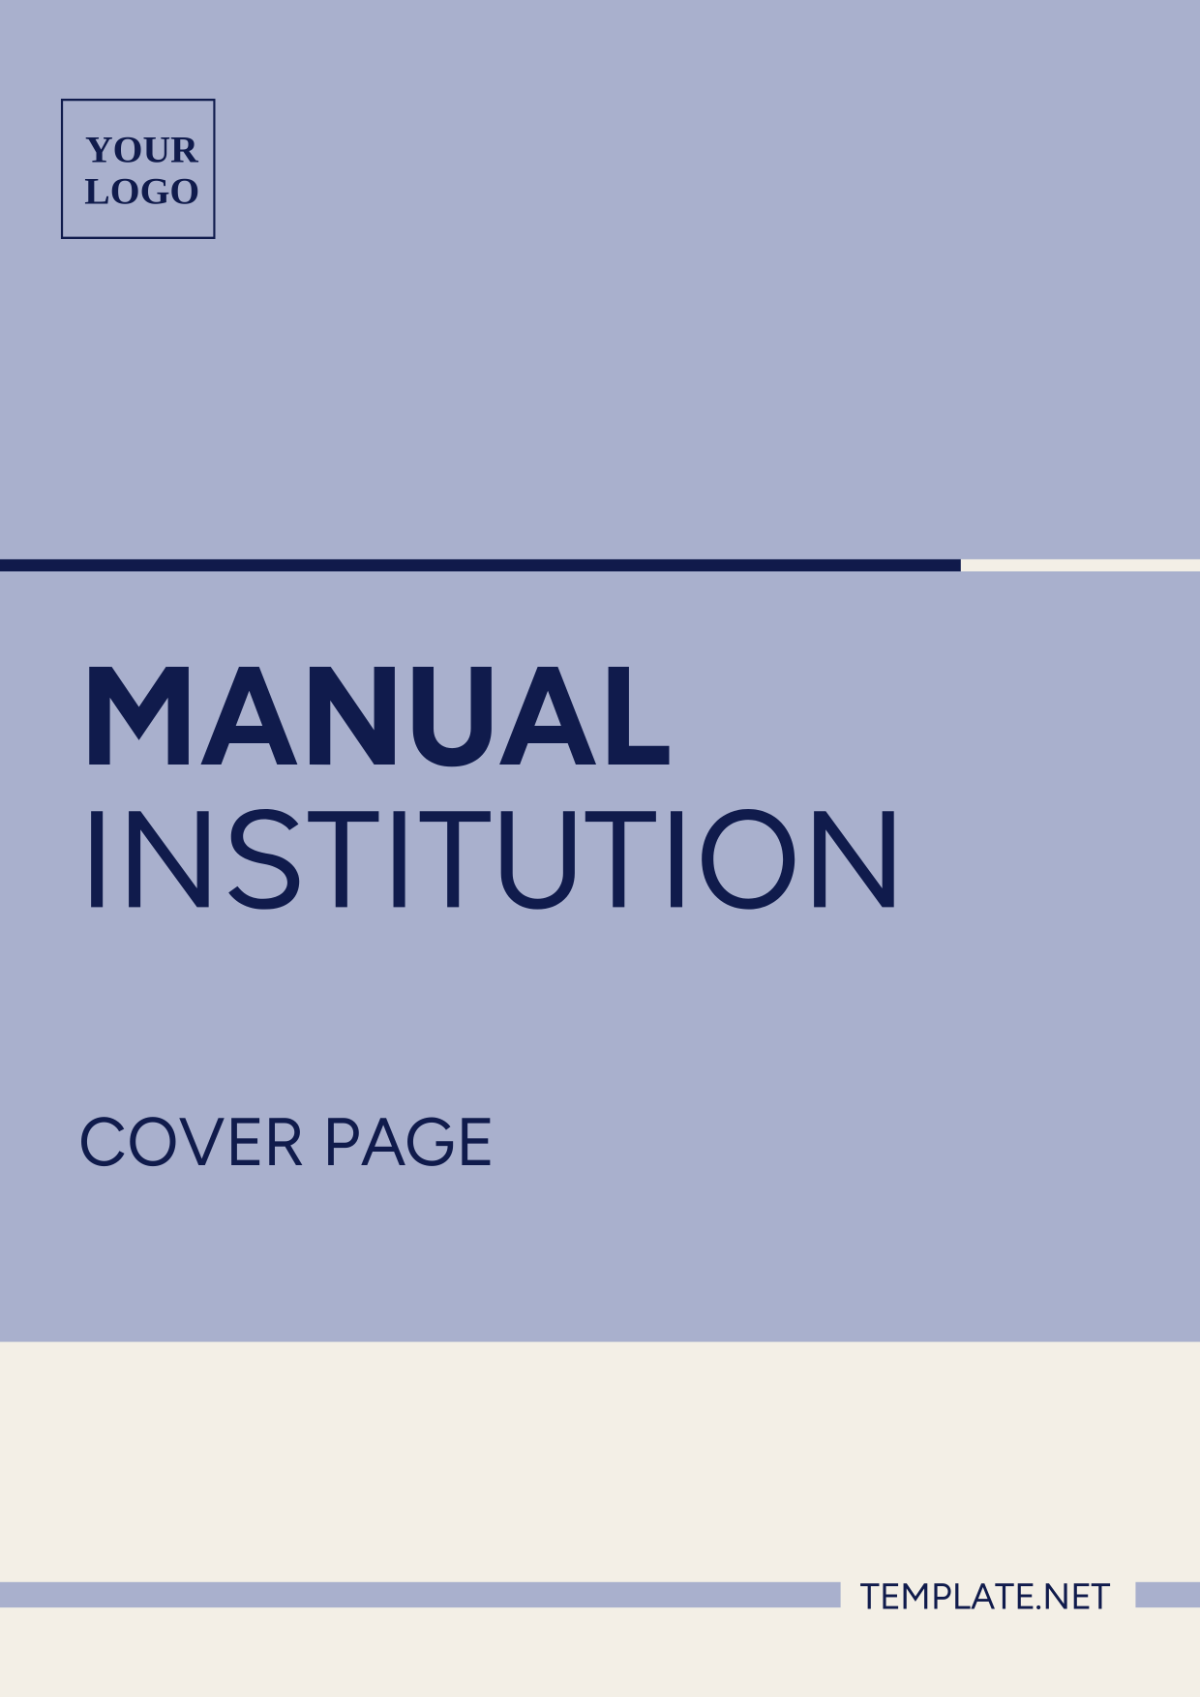 Manual Institutional Cover Page Template